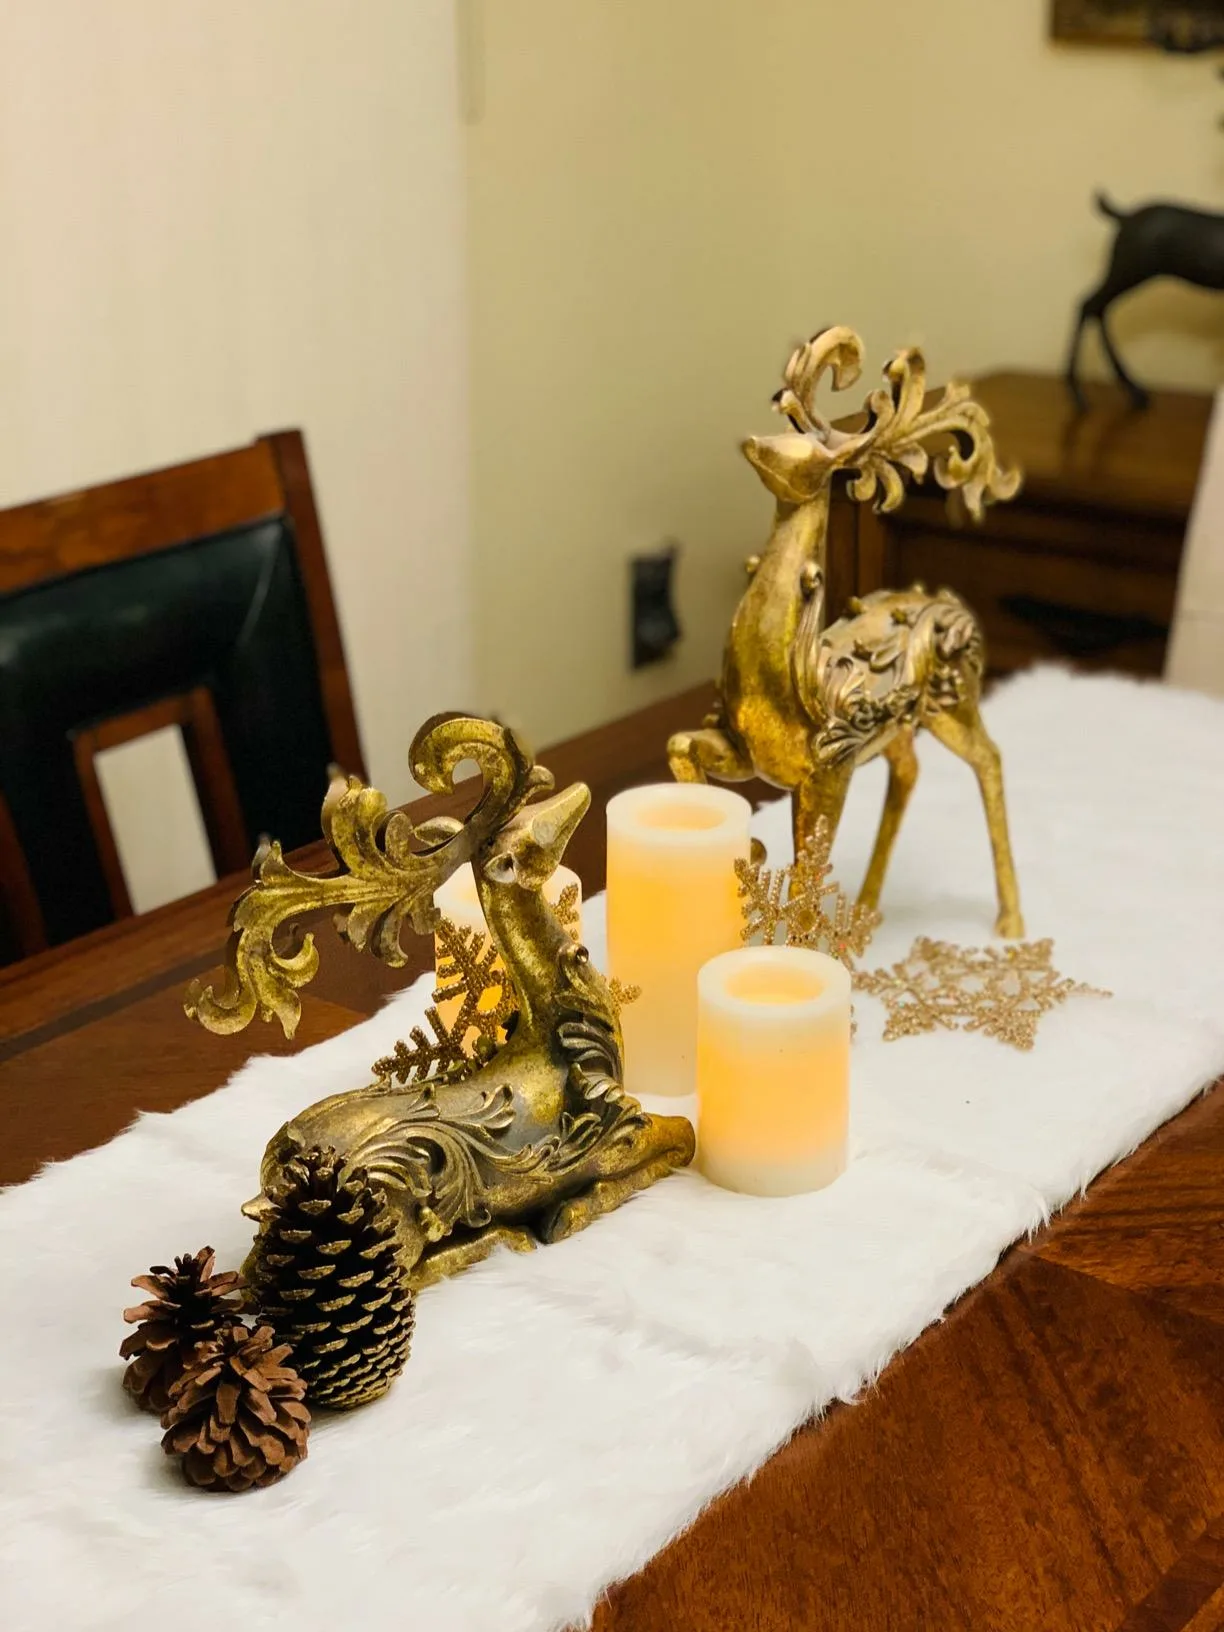 White Tablerunner Gold Reindeers Figurines Centerpiece Warm Ledcandles Side Angle View White Christmas Table Decorations